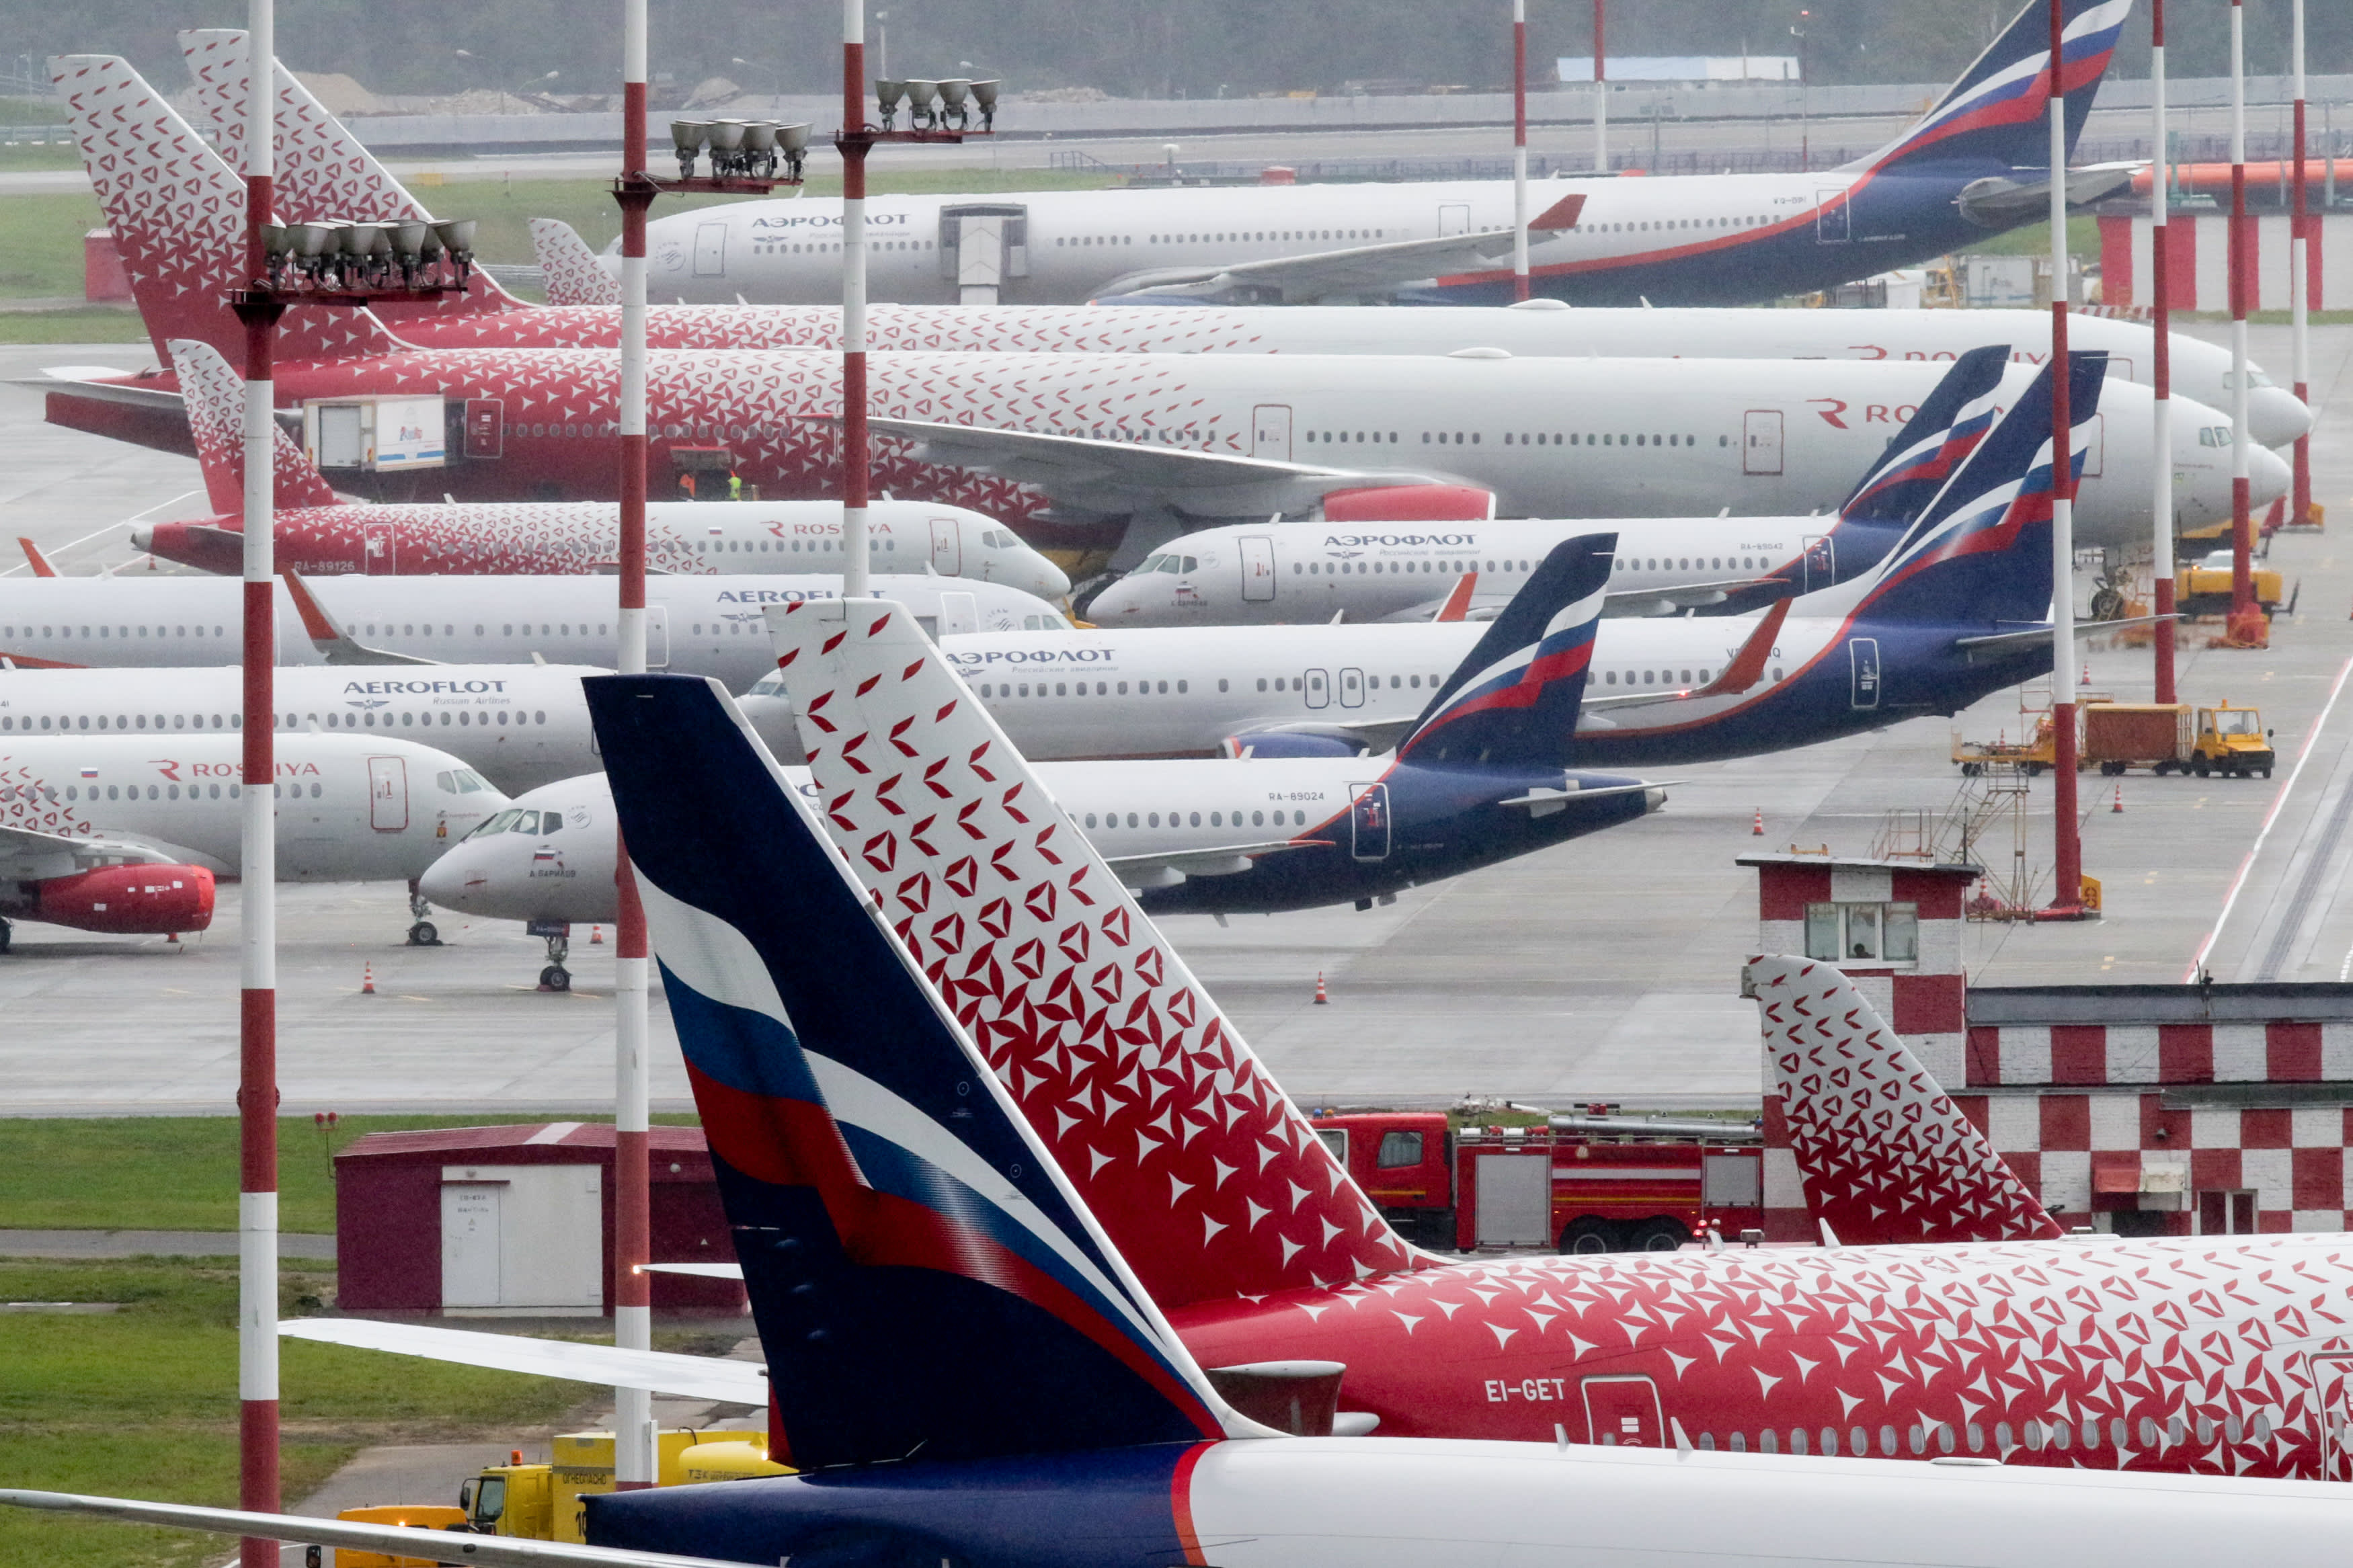 Airline software giant ends distribution service with Russia's Aeroflot, crippling